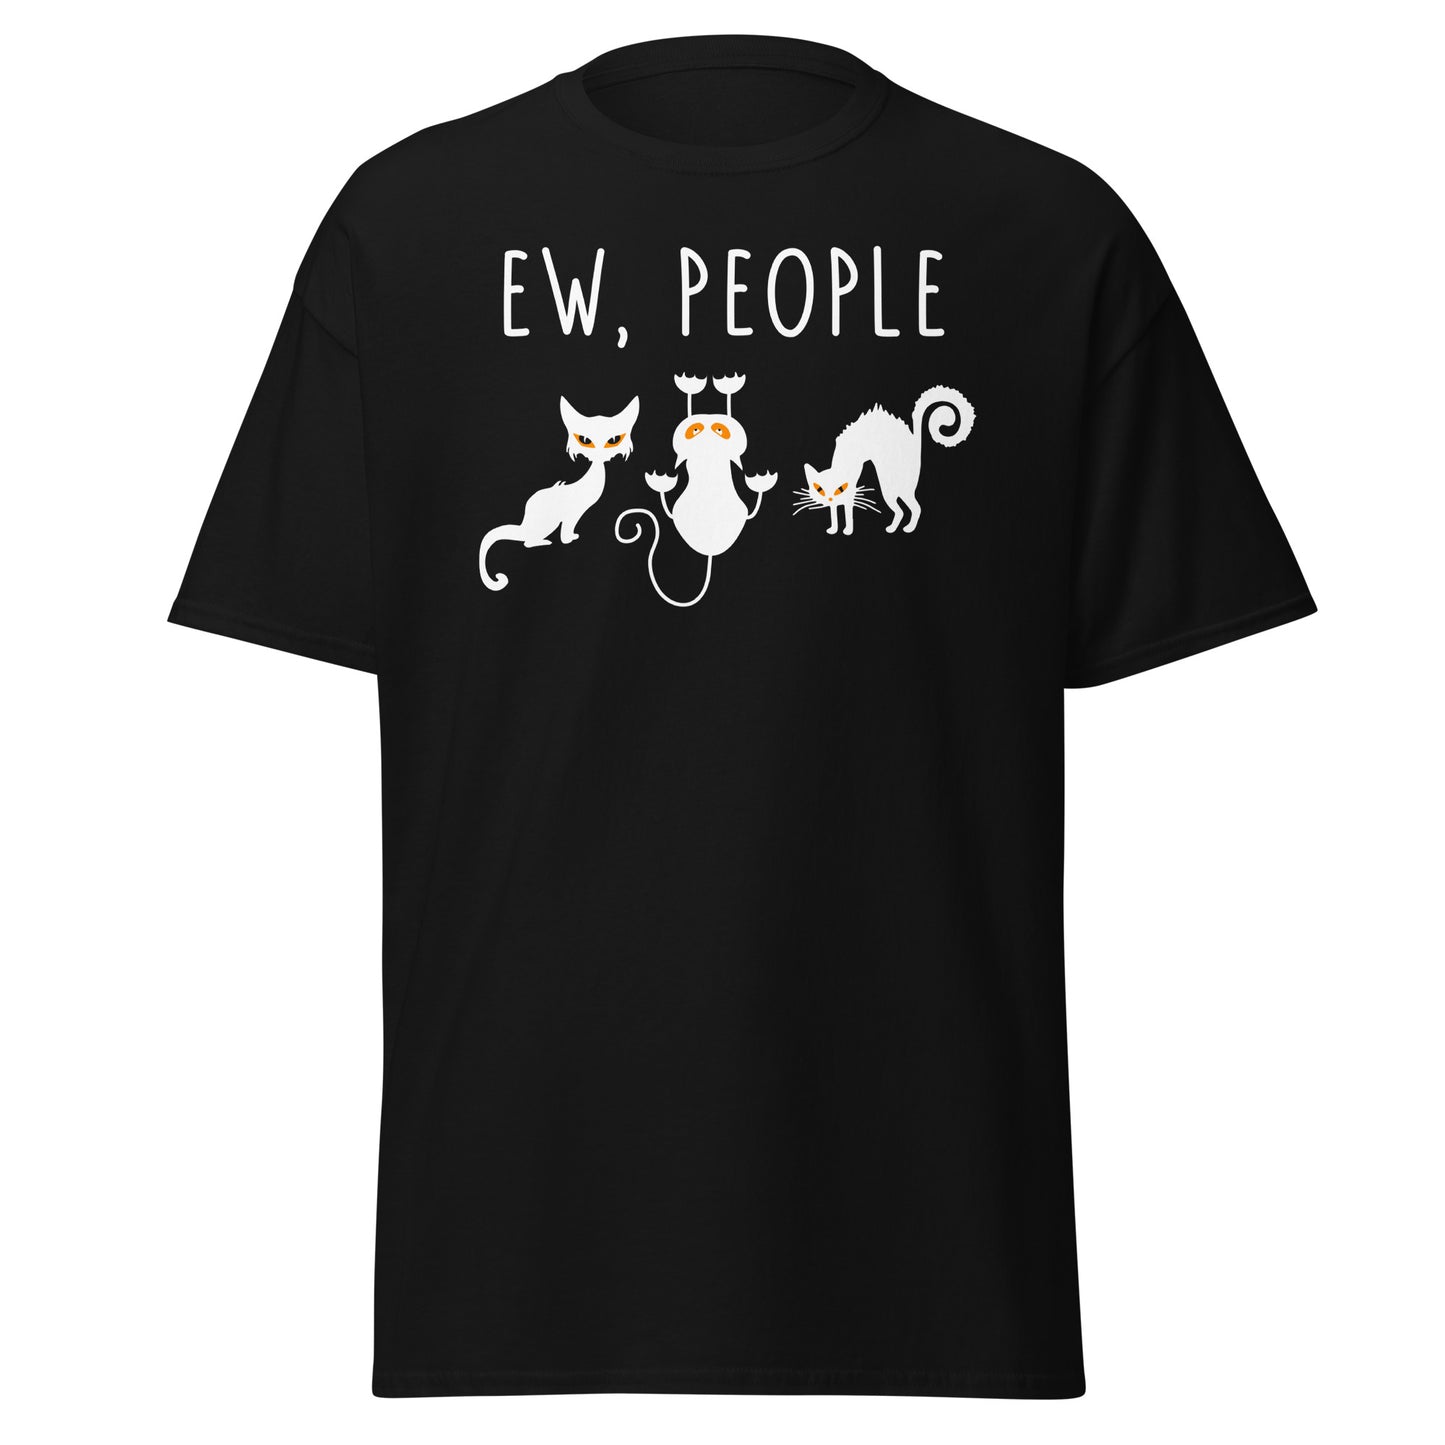 Ew, People: Halloween Soft Tee - Embrace the Introvert Vibe